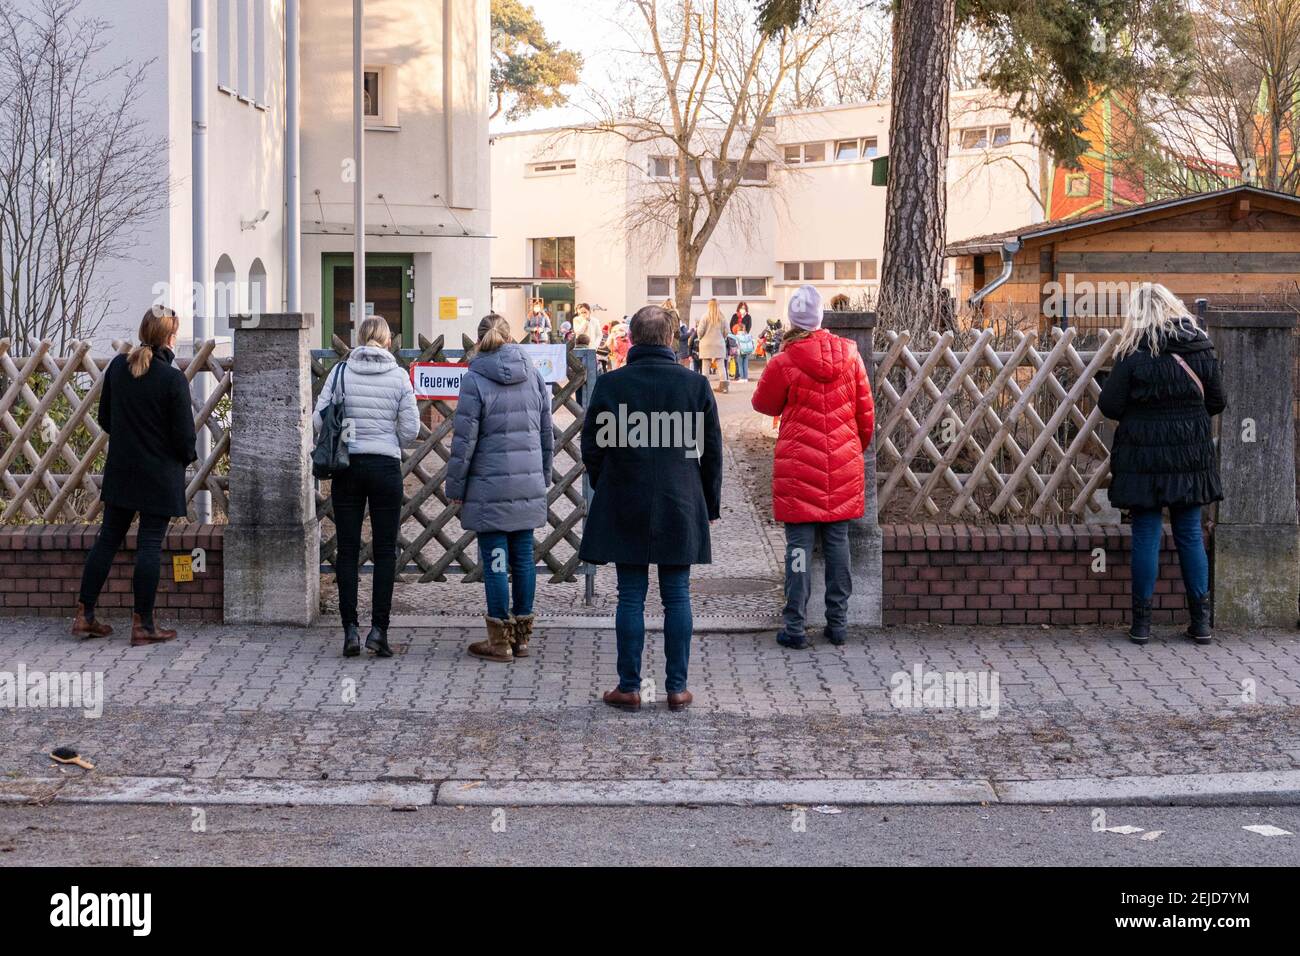 Berlin, Germany. 22nd Feb, 2021. Parents are seen at the entrance of a primary school in Berlin, capital of Germany, Feb. 22, 2021. According to local media, some schools and daycare centers in Germany have reopened with COVID-19 prevention measures in place on Monday. Credit: Stefan Zeitz/Xinhua/Alamy Live News Stock Photo